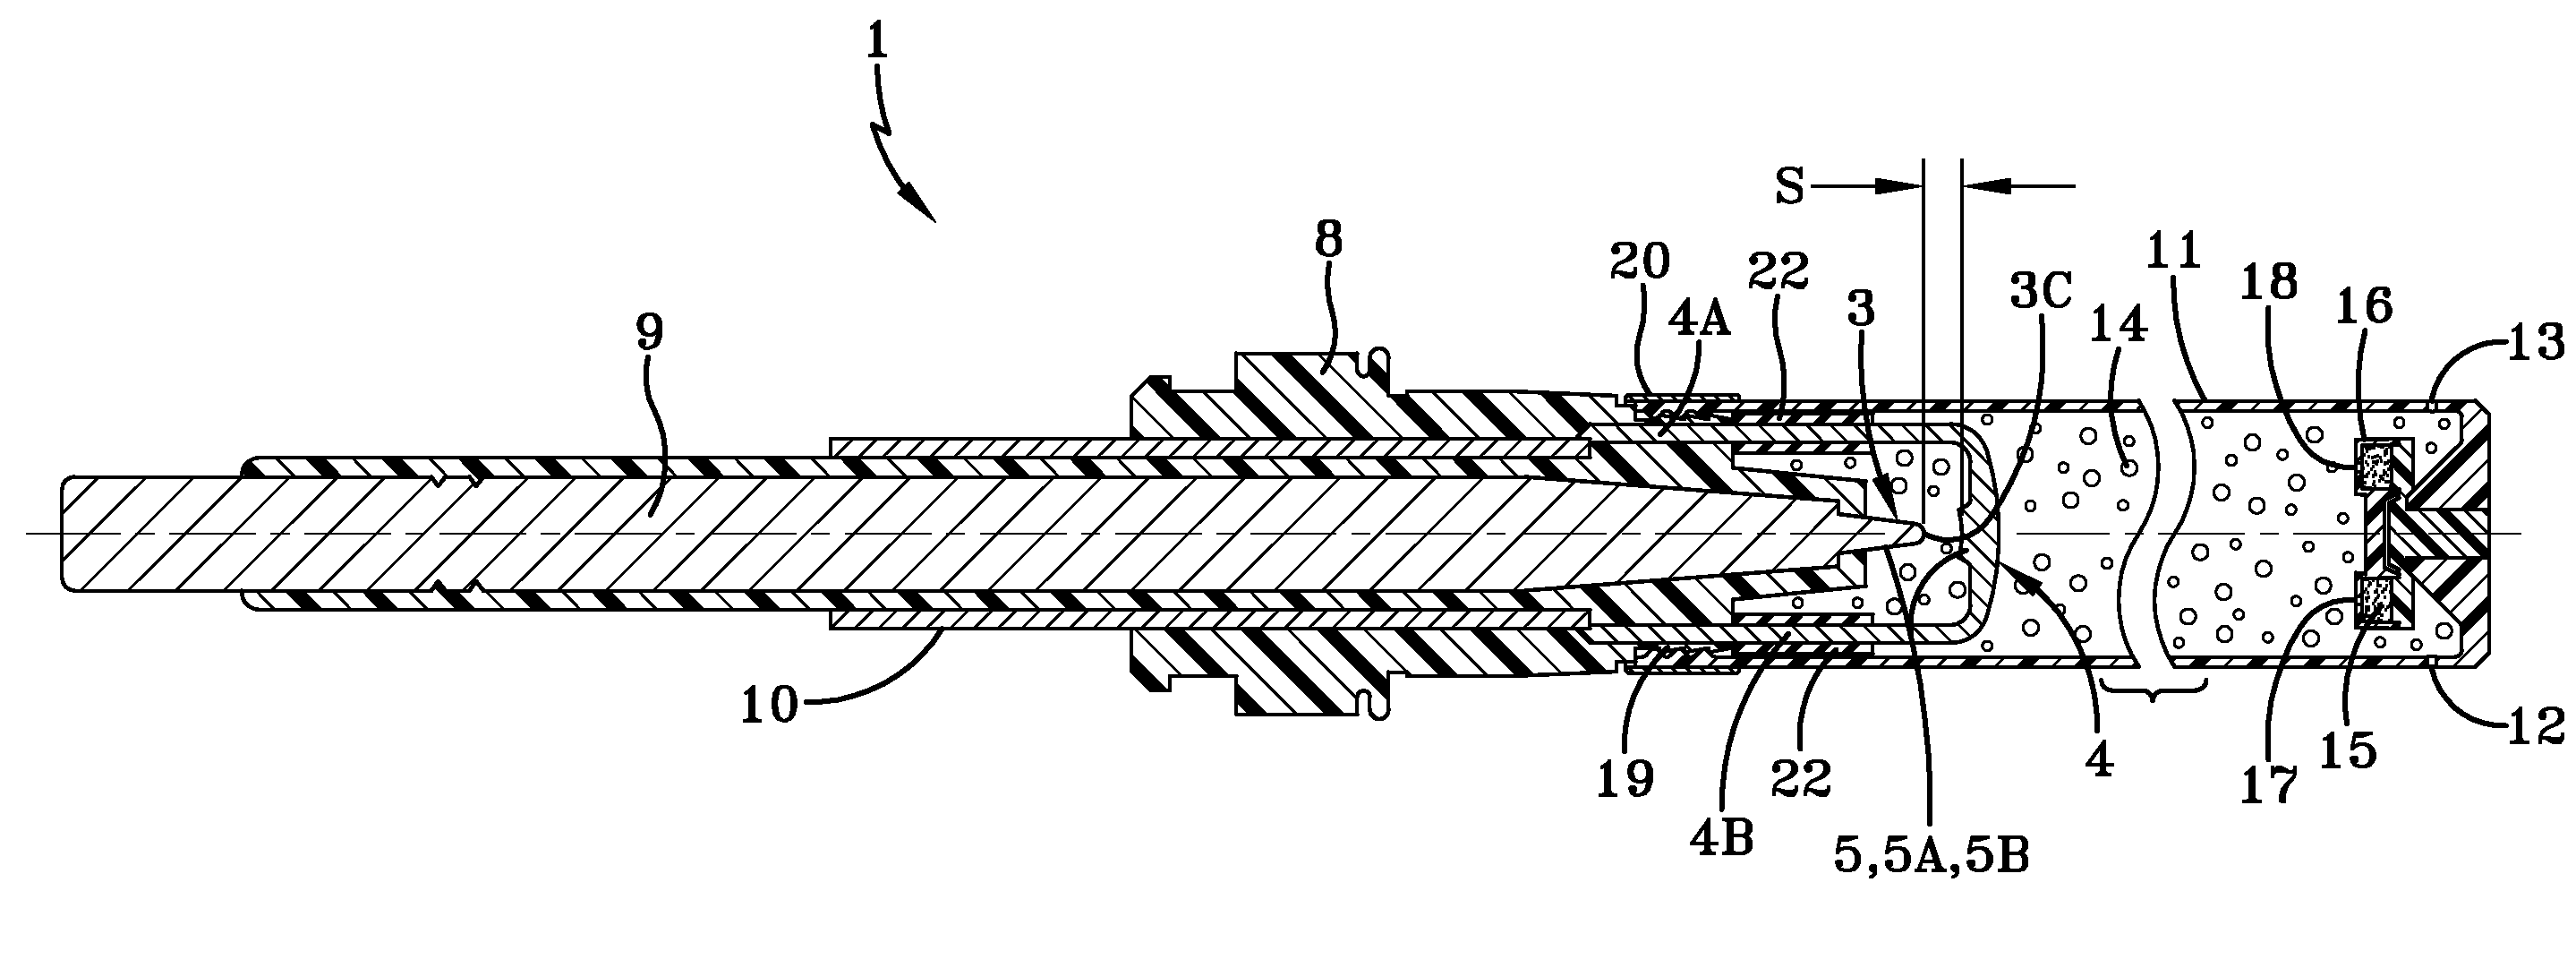 Device for producing electrical discharges in an aqueous medium